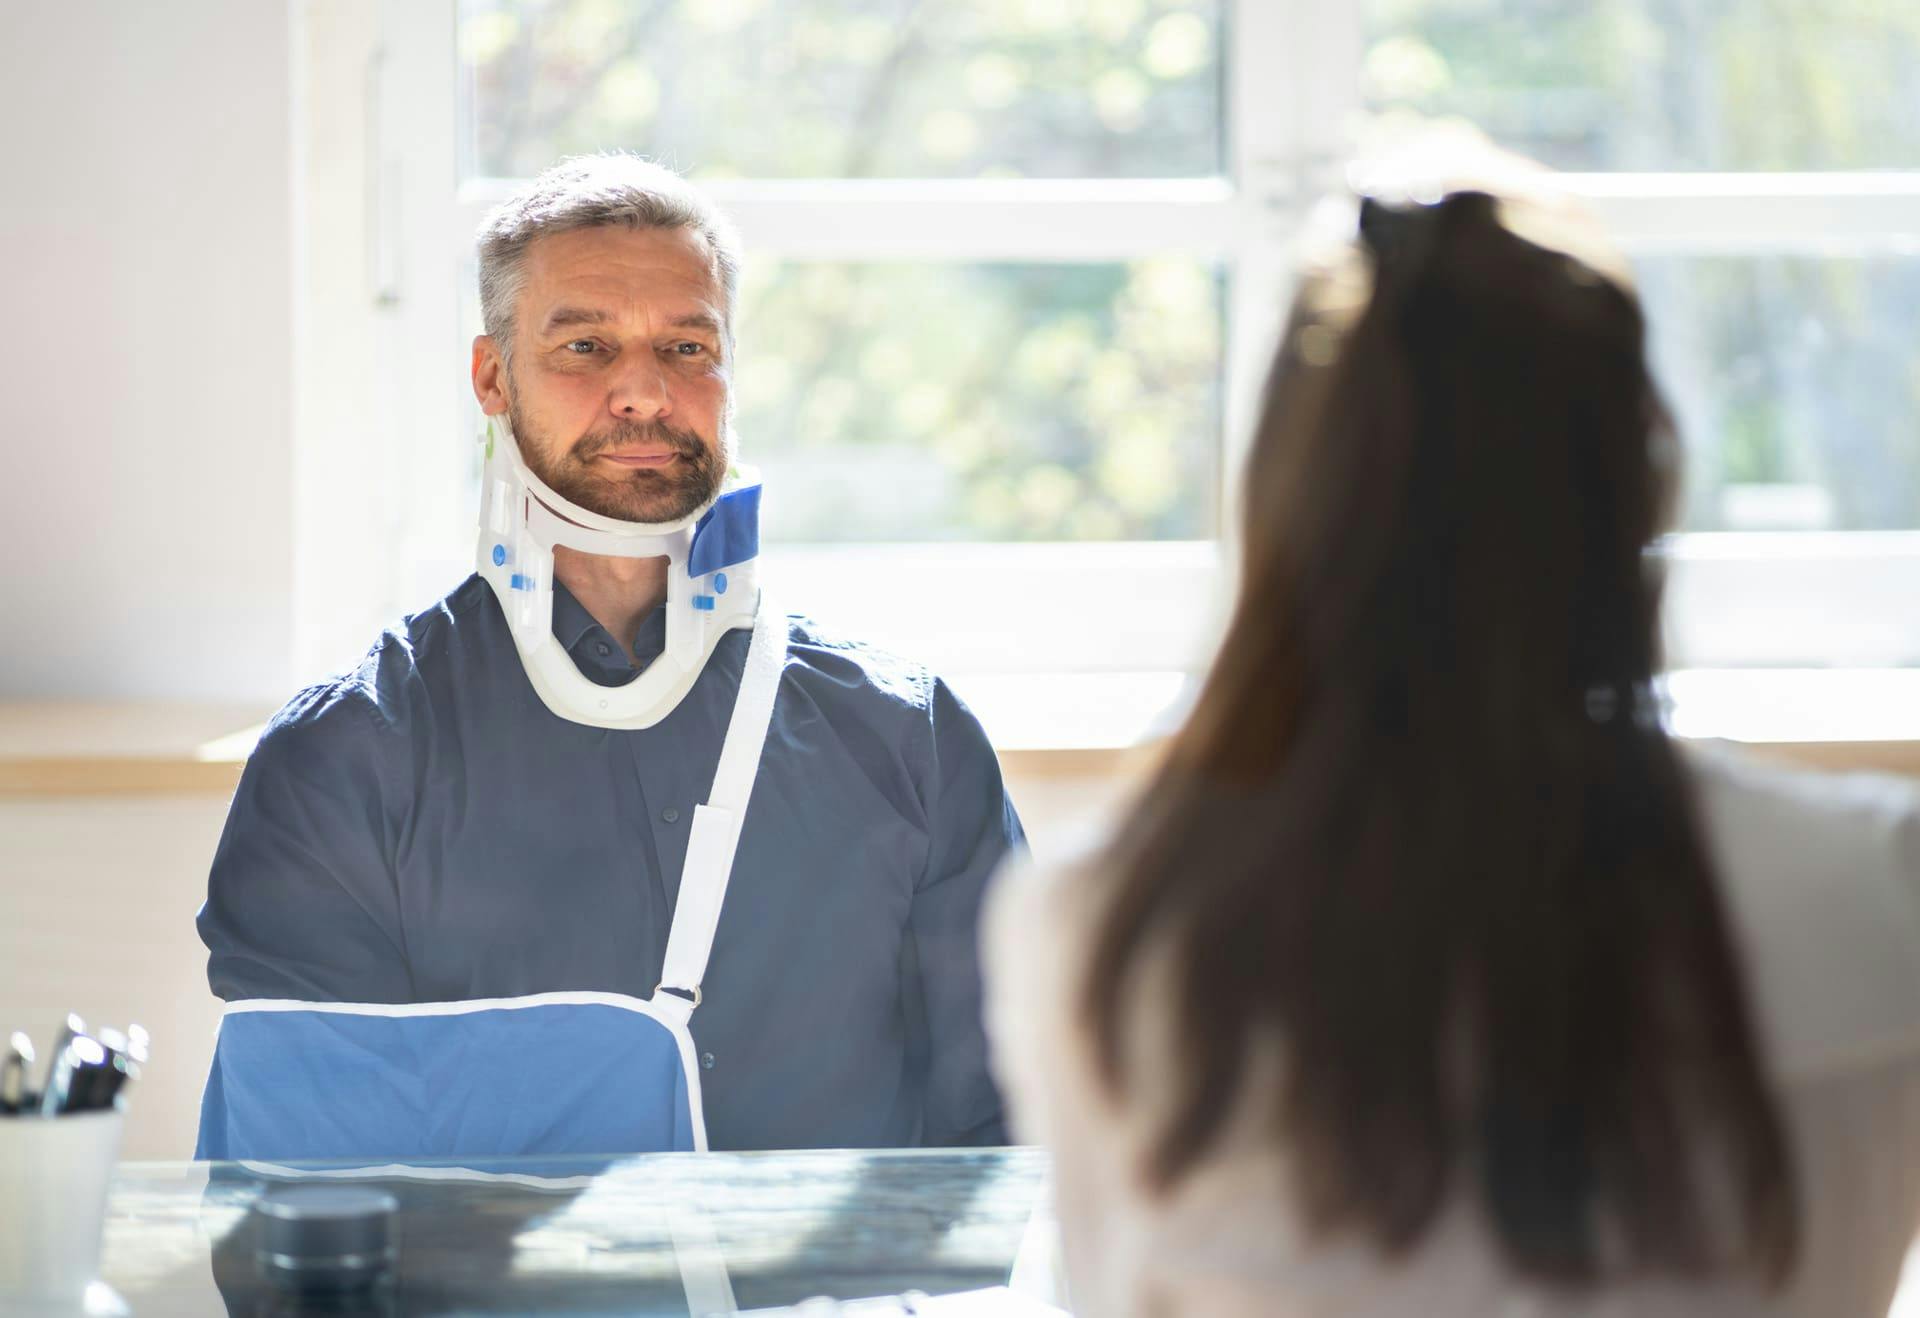 Man in a neck brace speaking with a medical person.